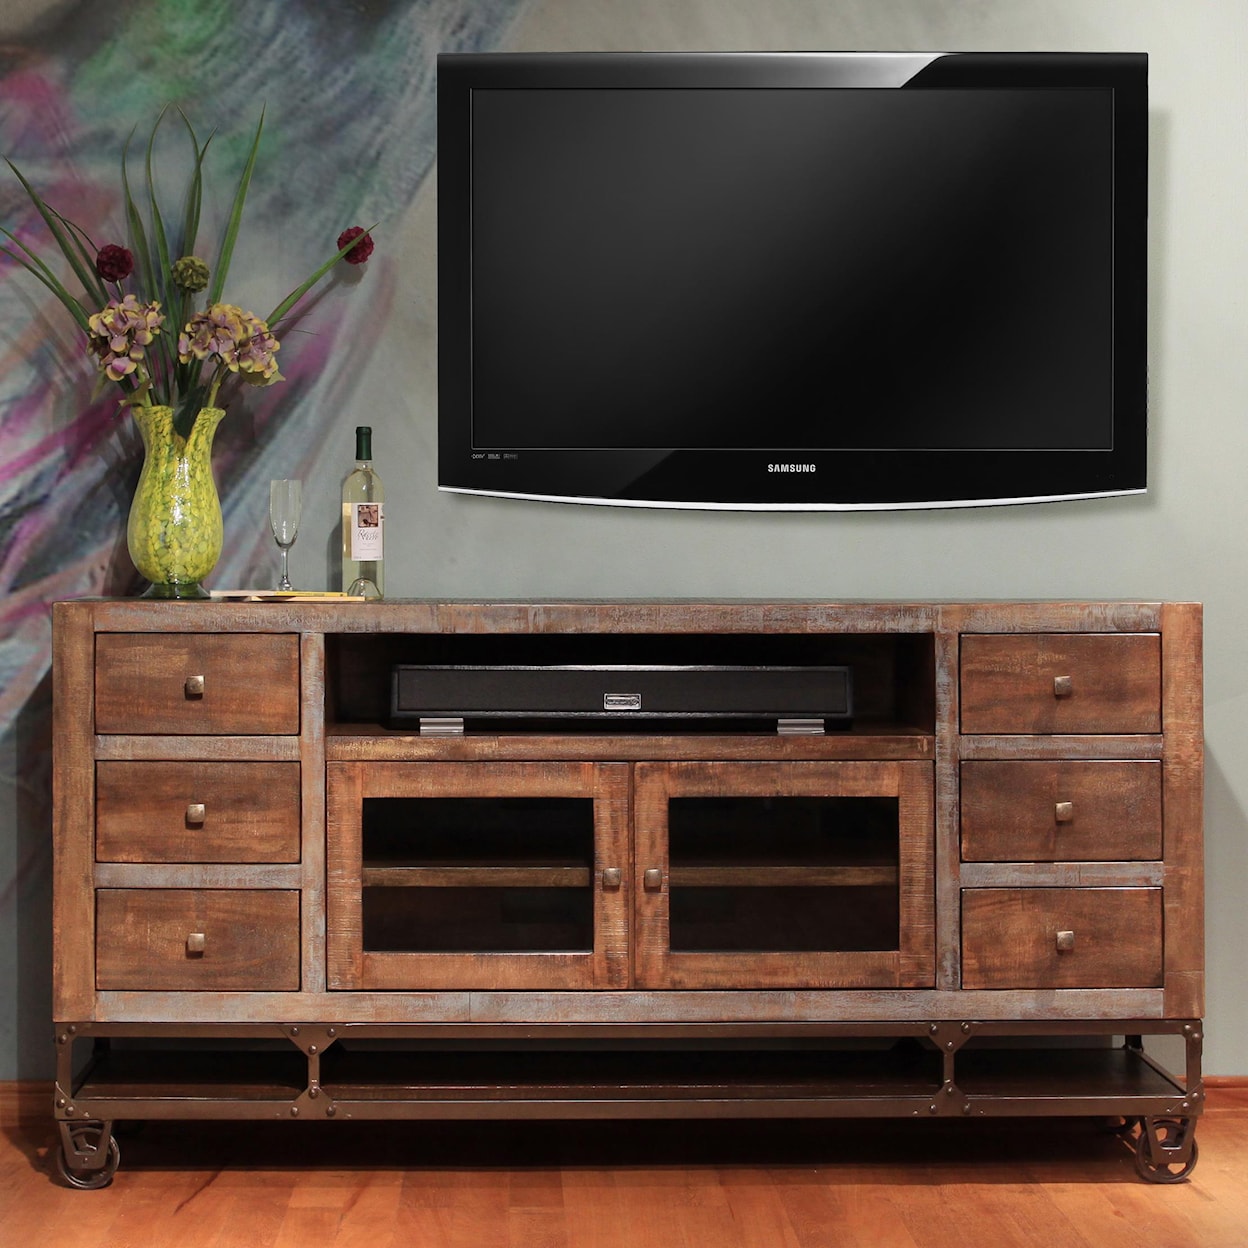 International Furniture Direct Urban Gold 76" Solid Wood TV Stand